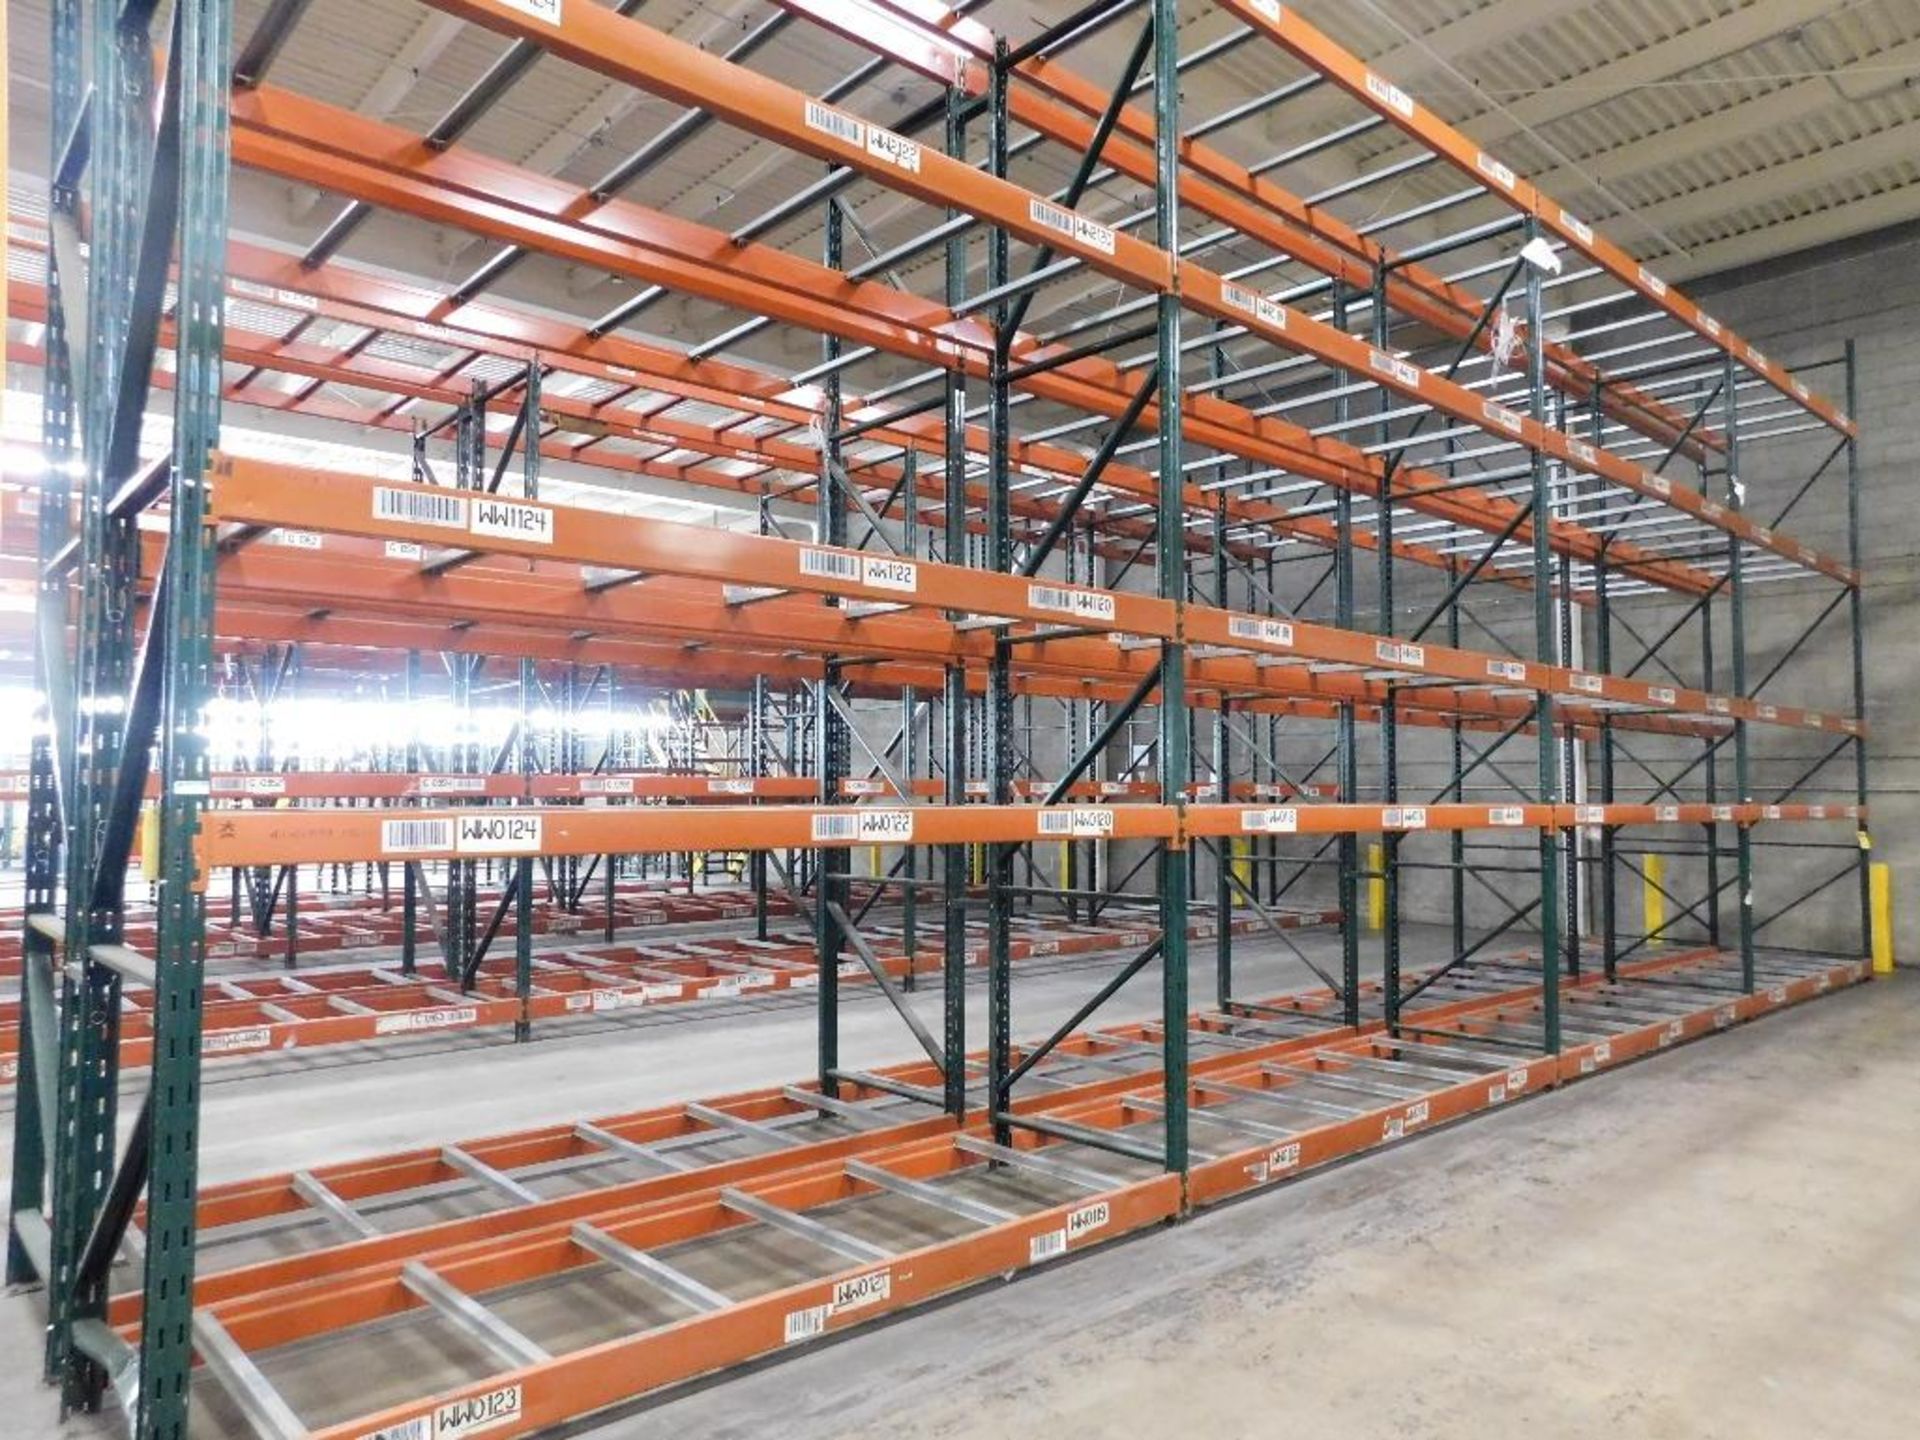 (8X) SECTIONS OF RIDG-U-RAK PALLET RACKING, (2) 20 FT. UPRIGHTS, (3) 17 FT. 4 IN. UPRIGHTS, (60) 5 1